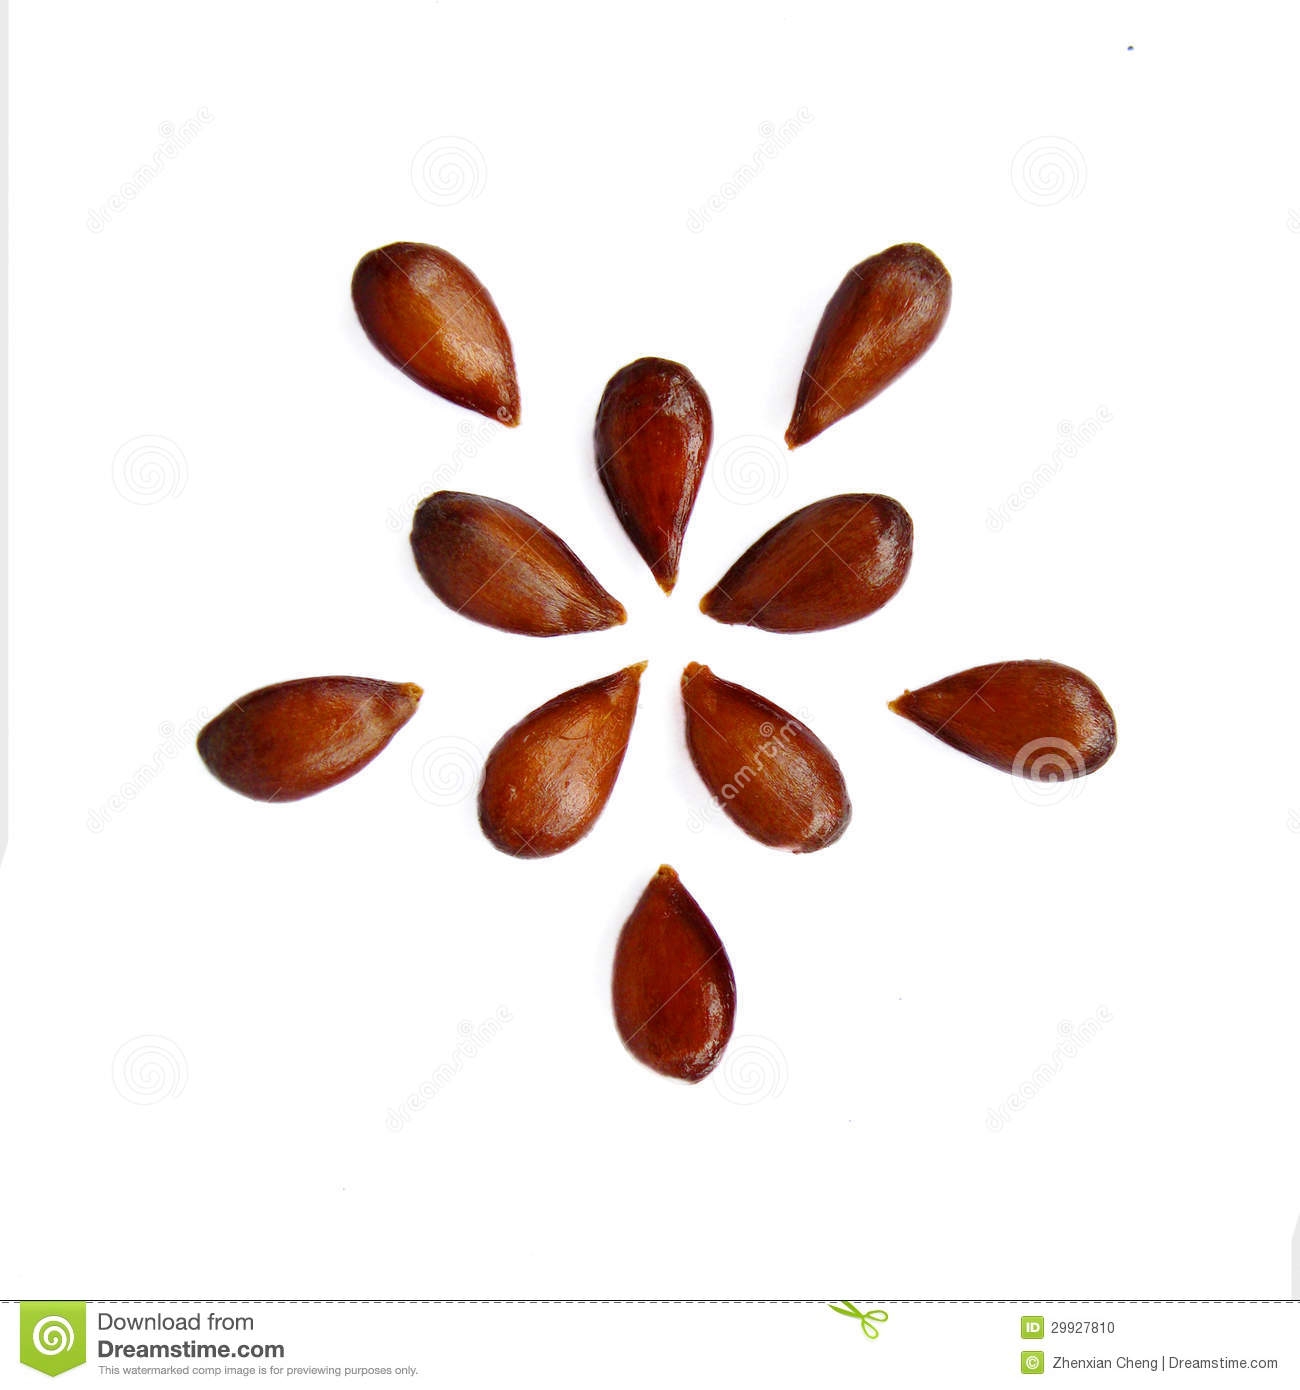 Apple Seeds Pattern Clipart.